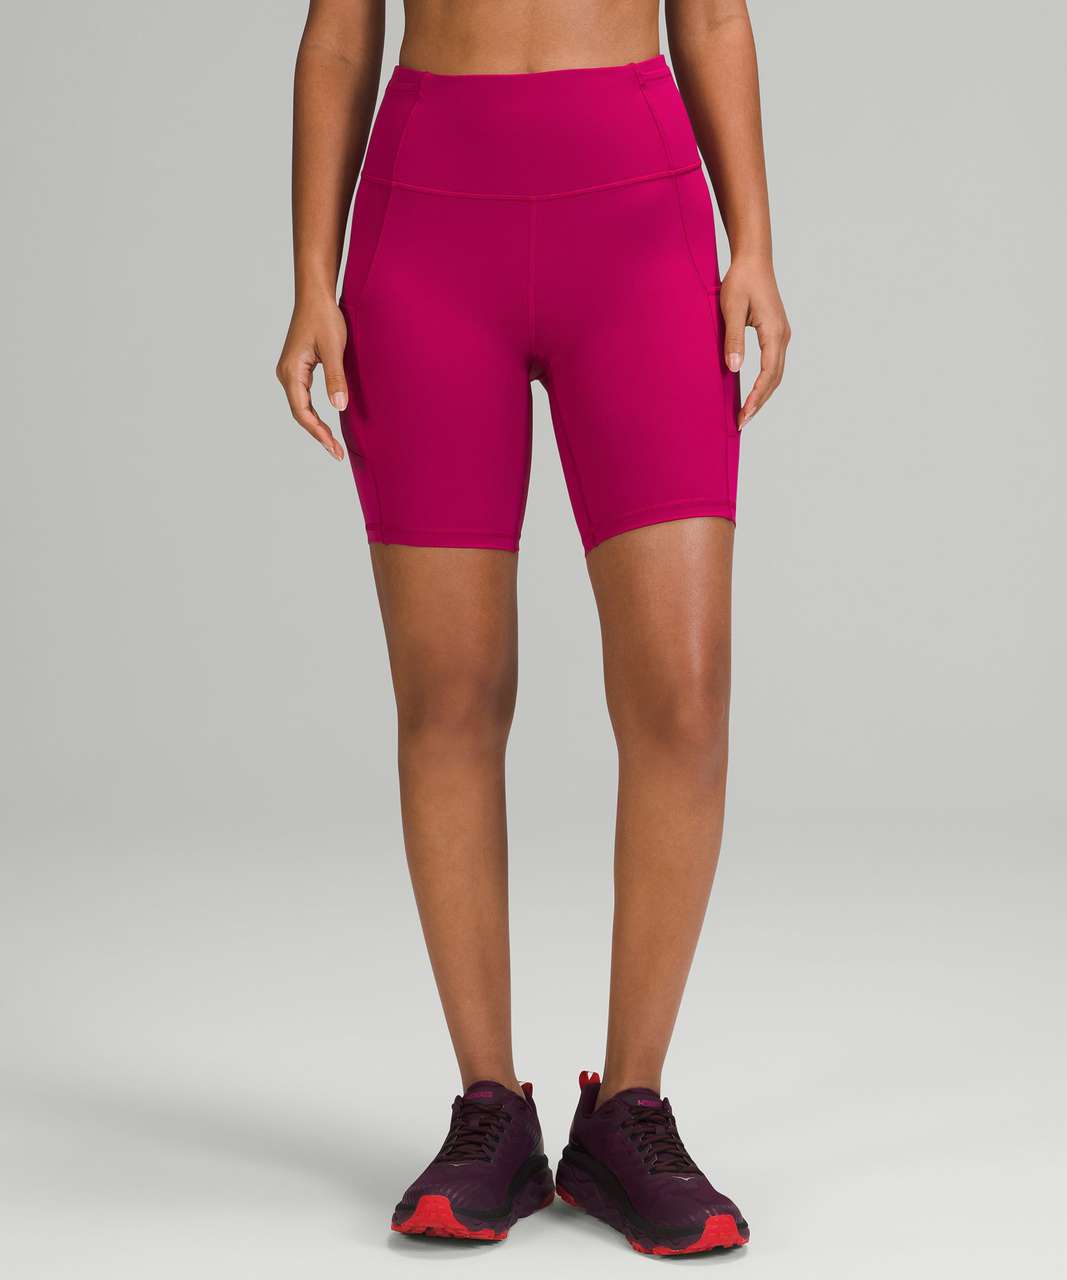 Lululemon Fast and Free High-Rise Short 8" - Wild Berry